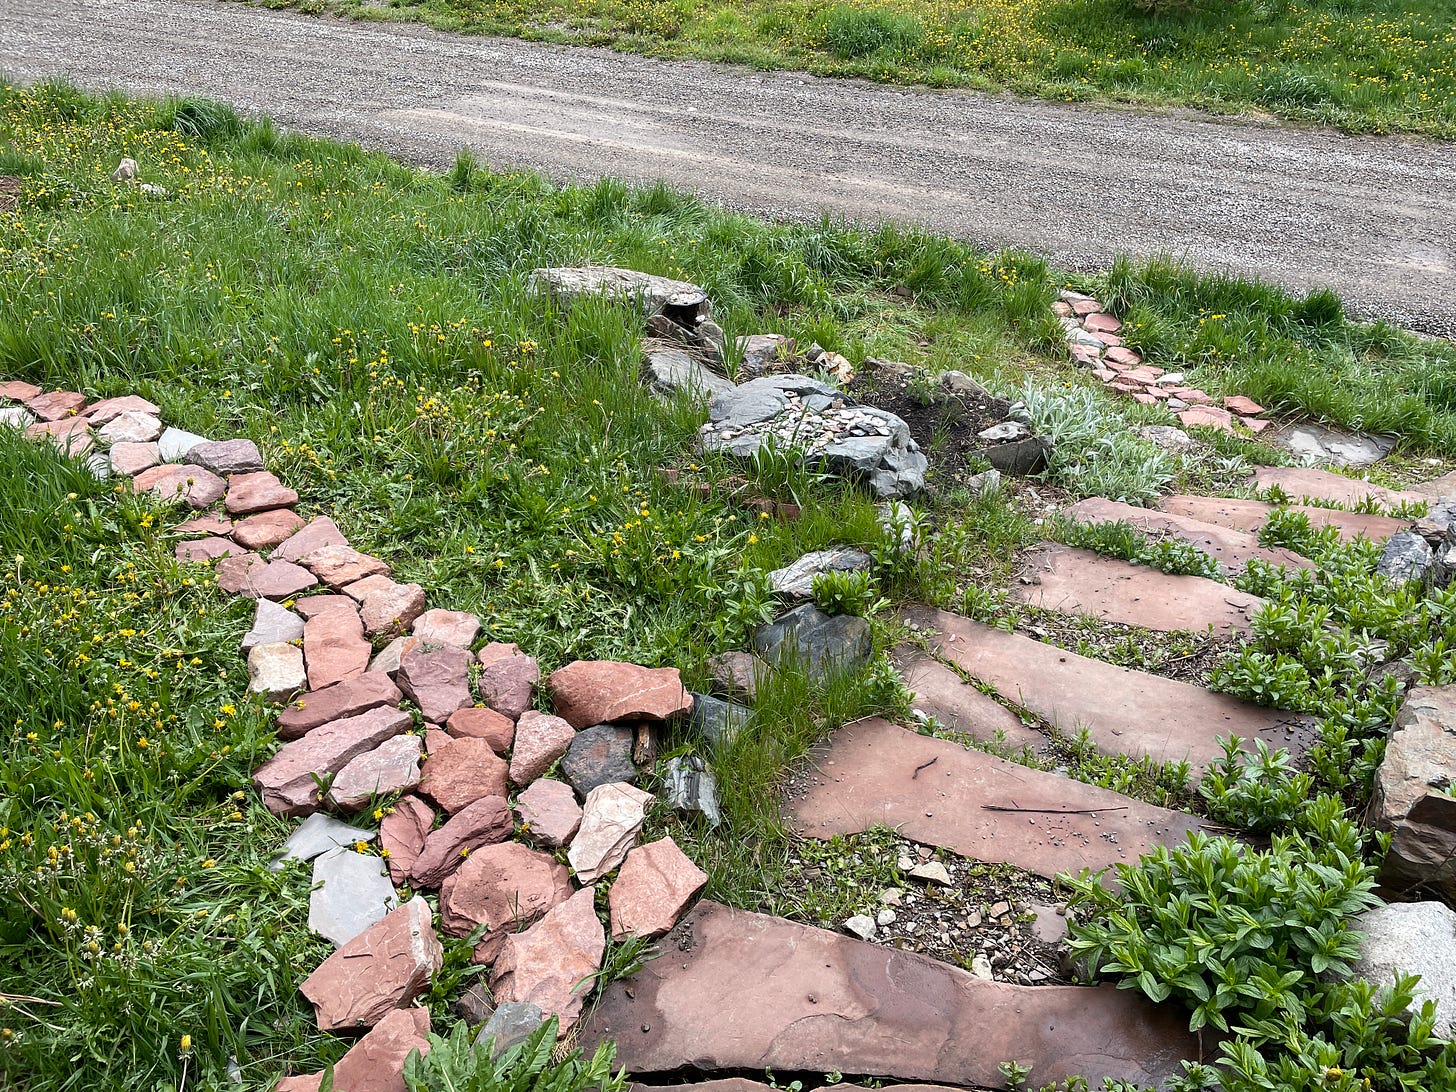 stone laid haphazardly into paths in a messy garden